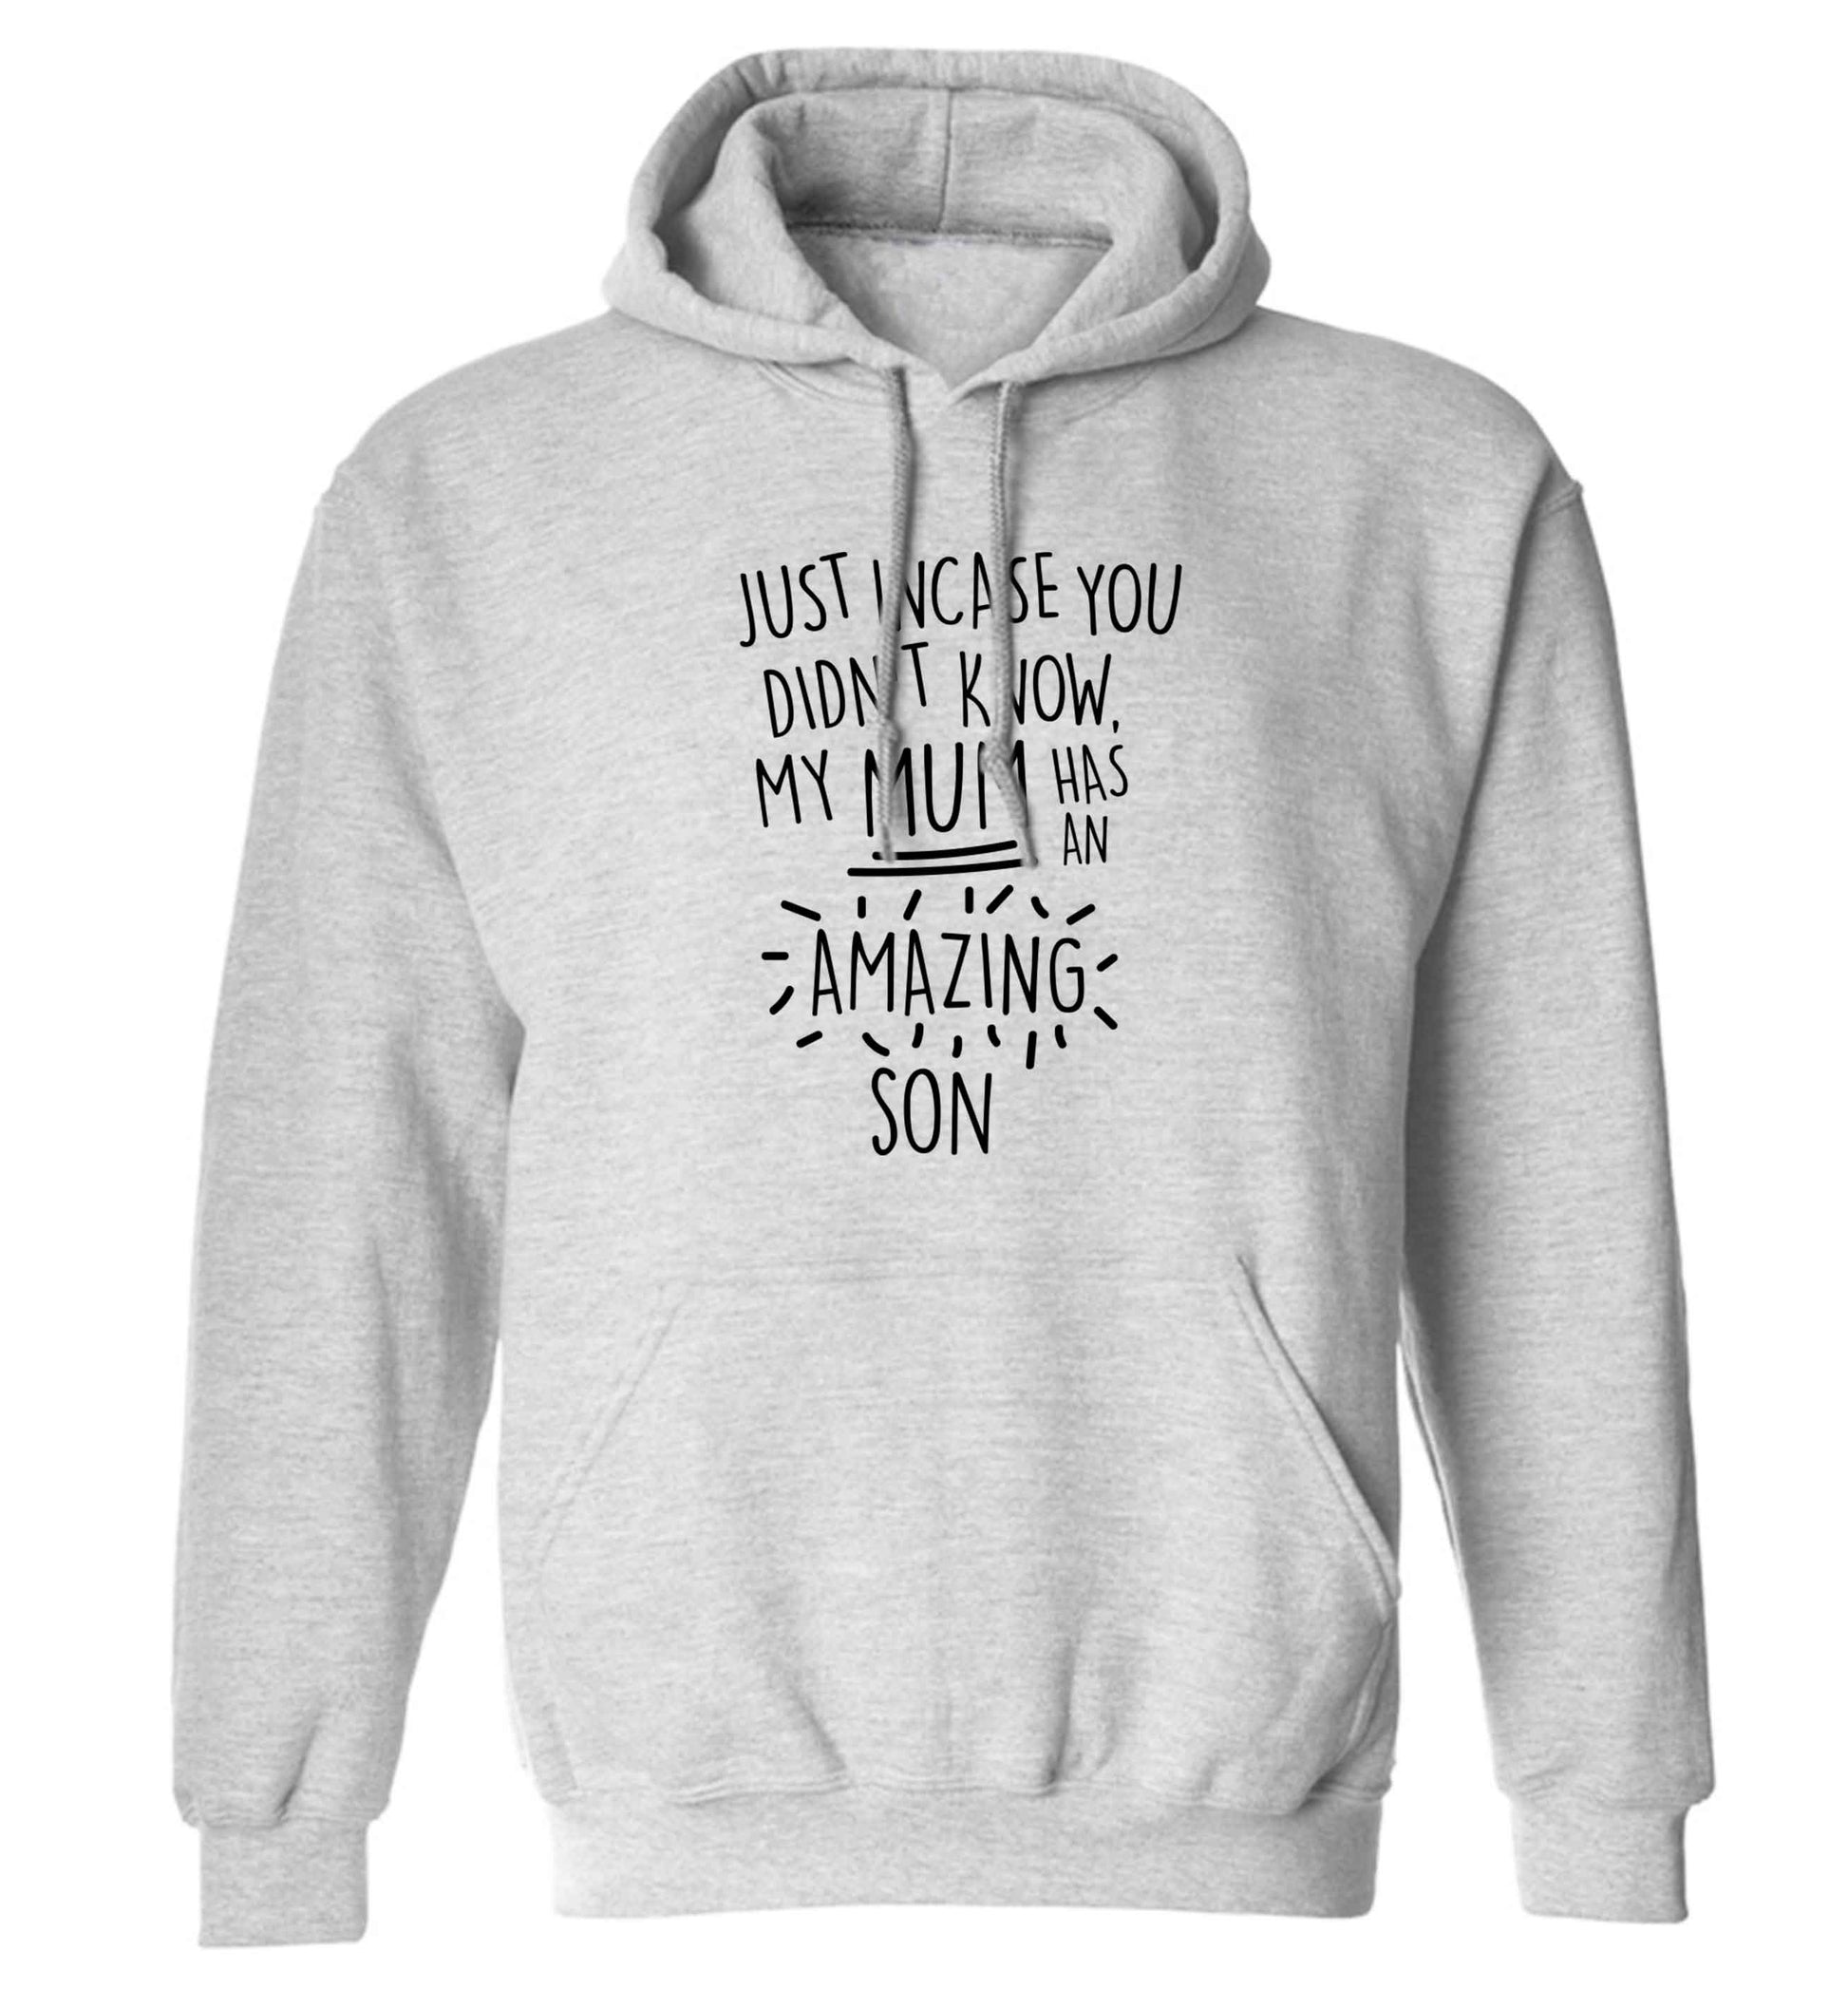 Just incase you didn't know my mum has an amazing son adults unisex grey hoodie 2XL